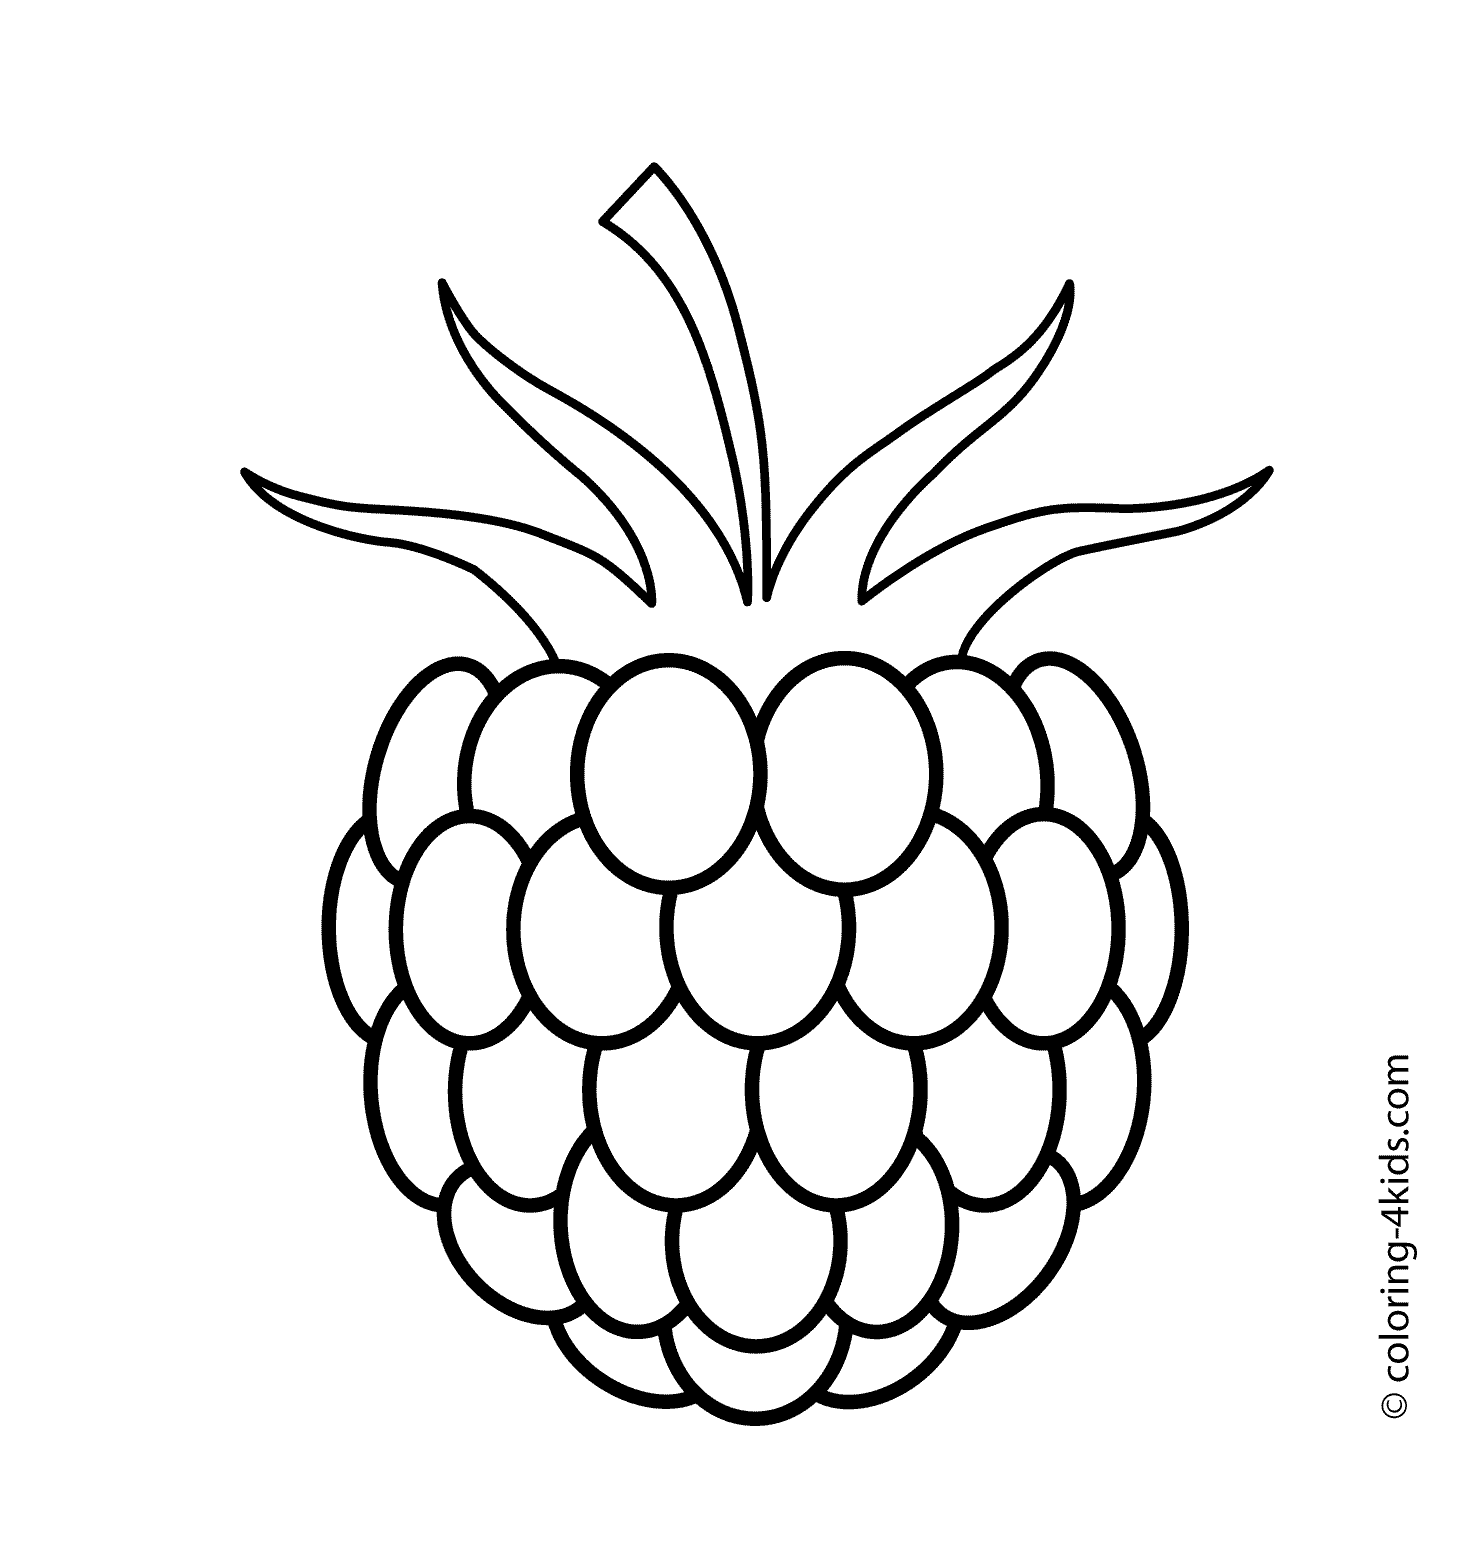 One raspberry fruits and. Berry clipart outline